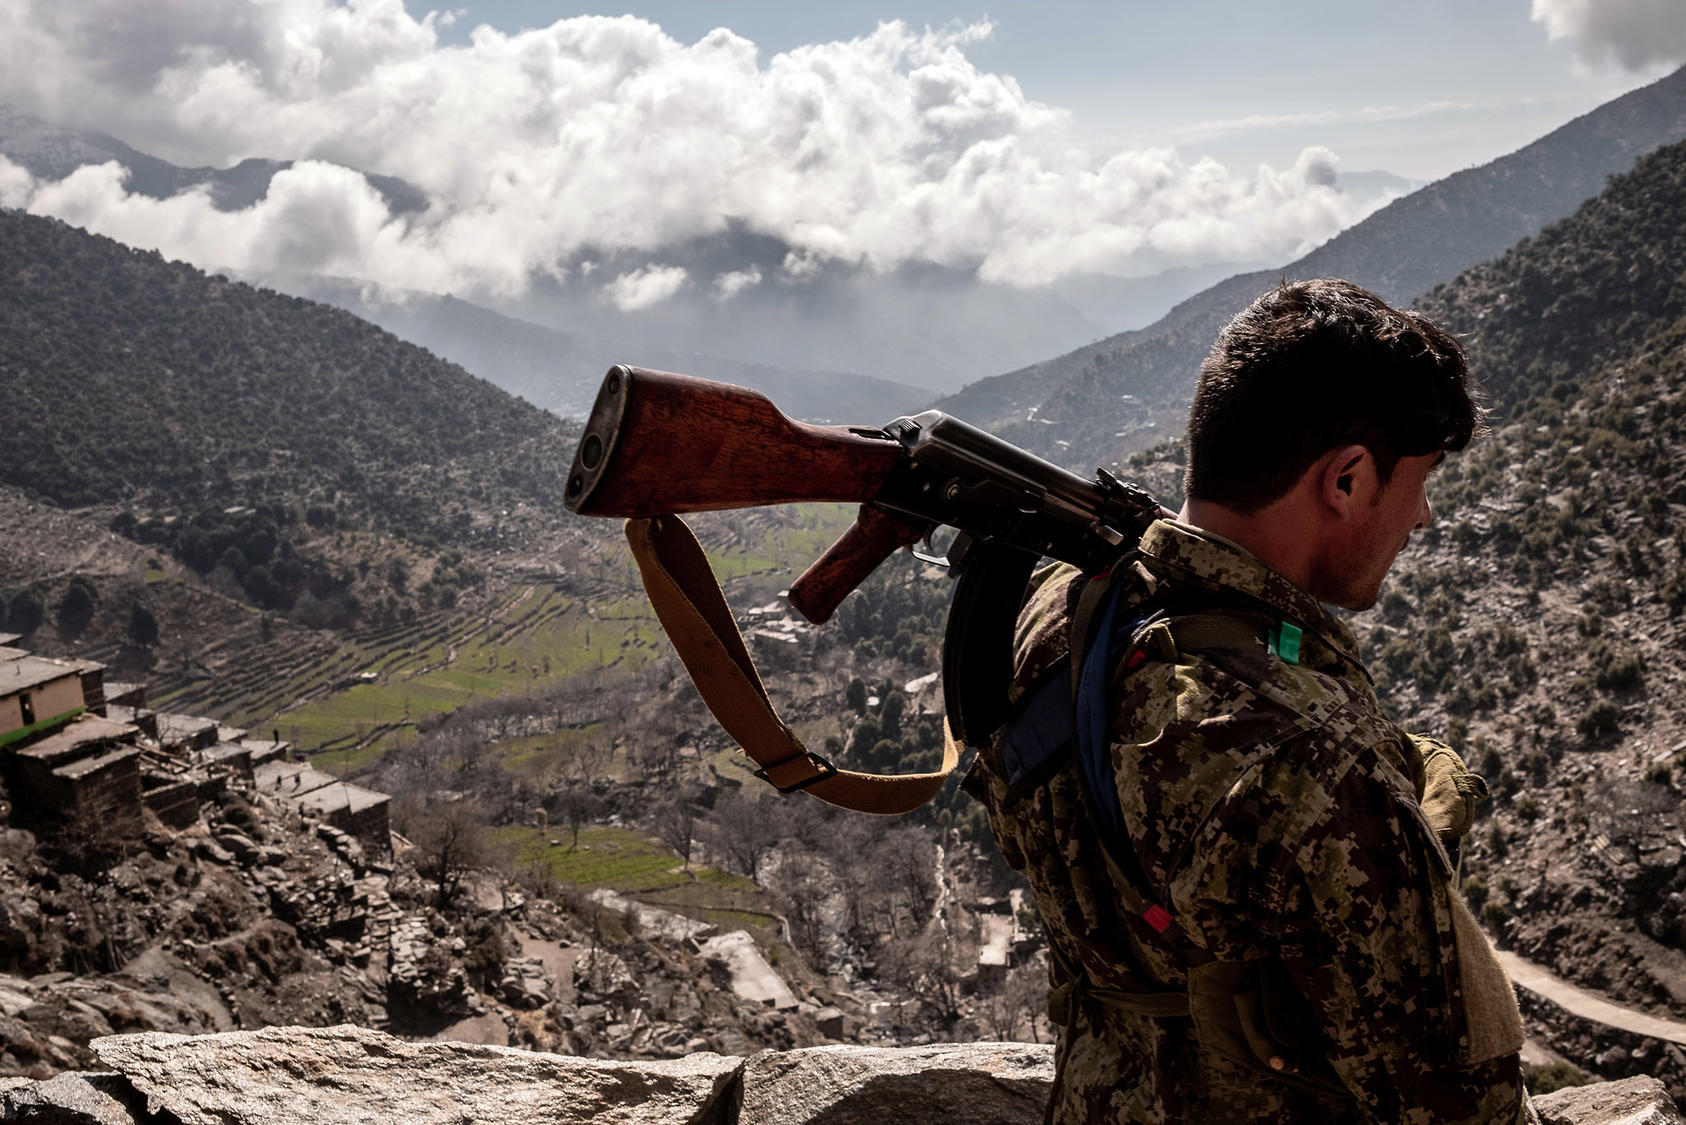 : A militiaman in Nangarhar Province in eastern Afghanistan, where the Islamic State has been active, on Feb. 15, 2019. (Jim Huylebroek/The New York Times)